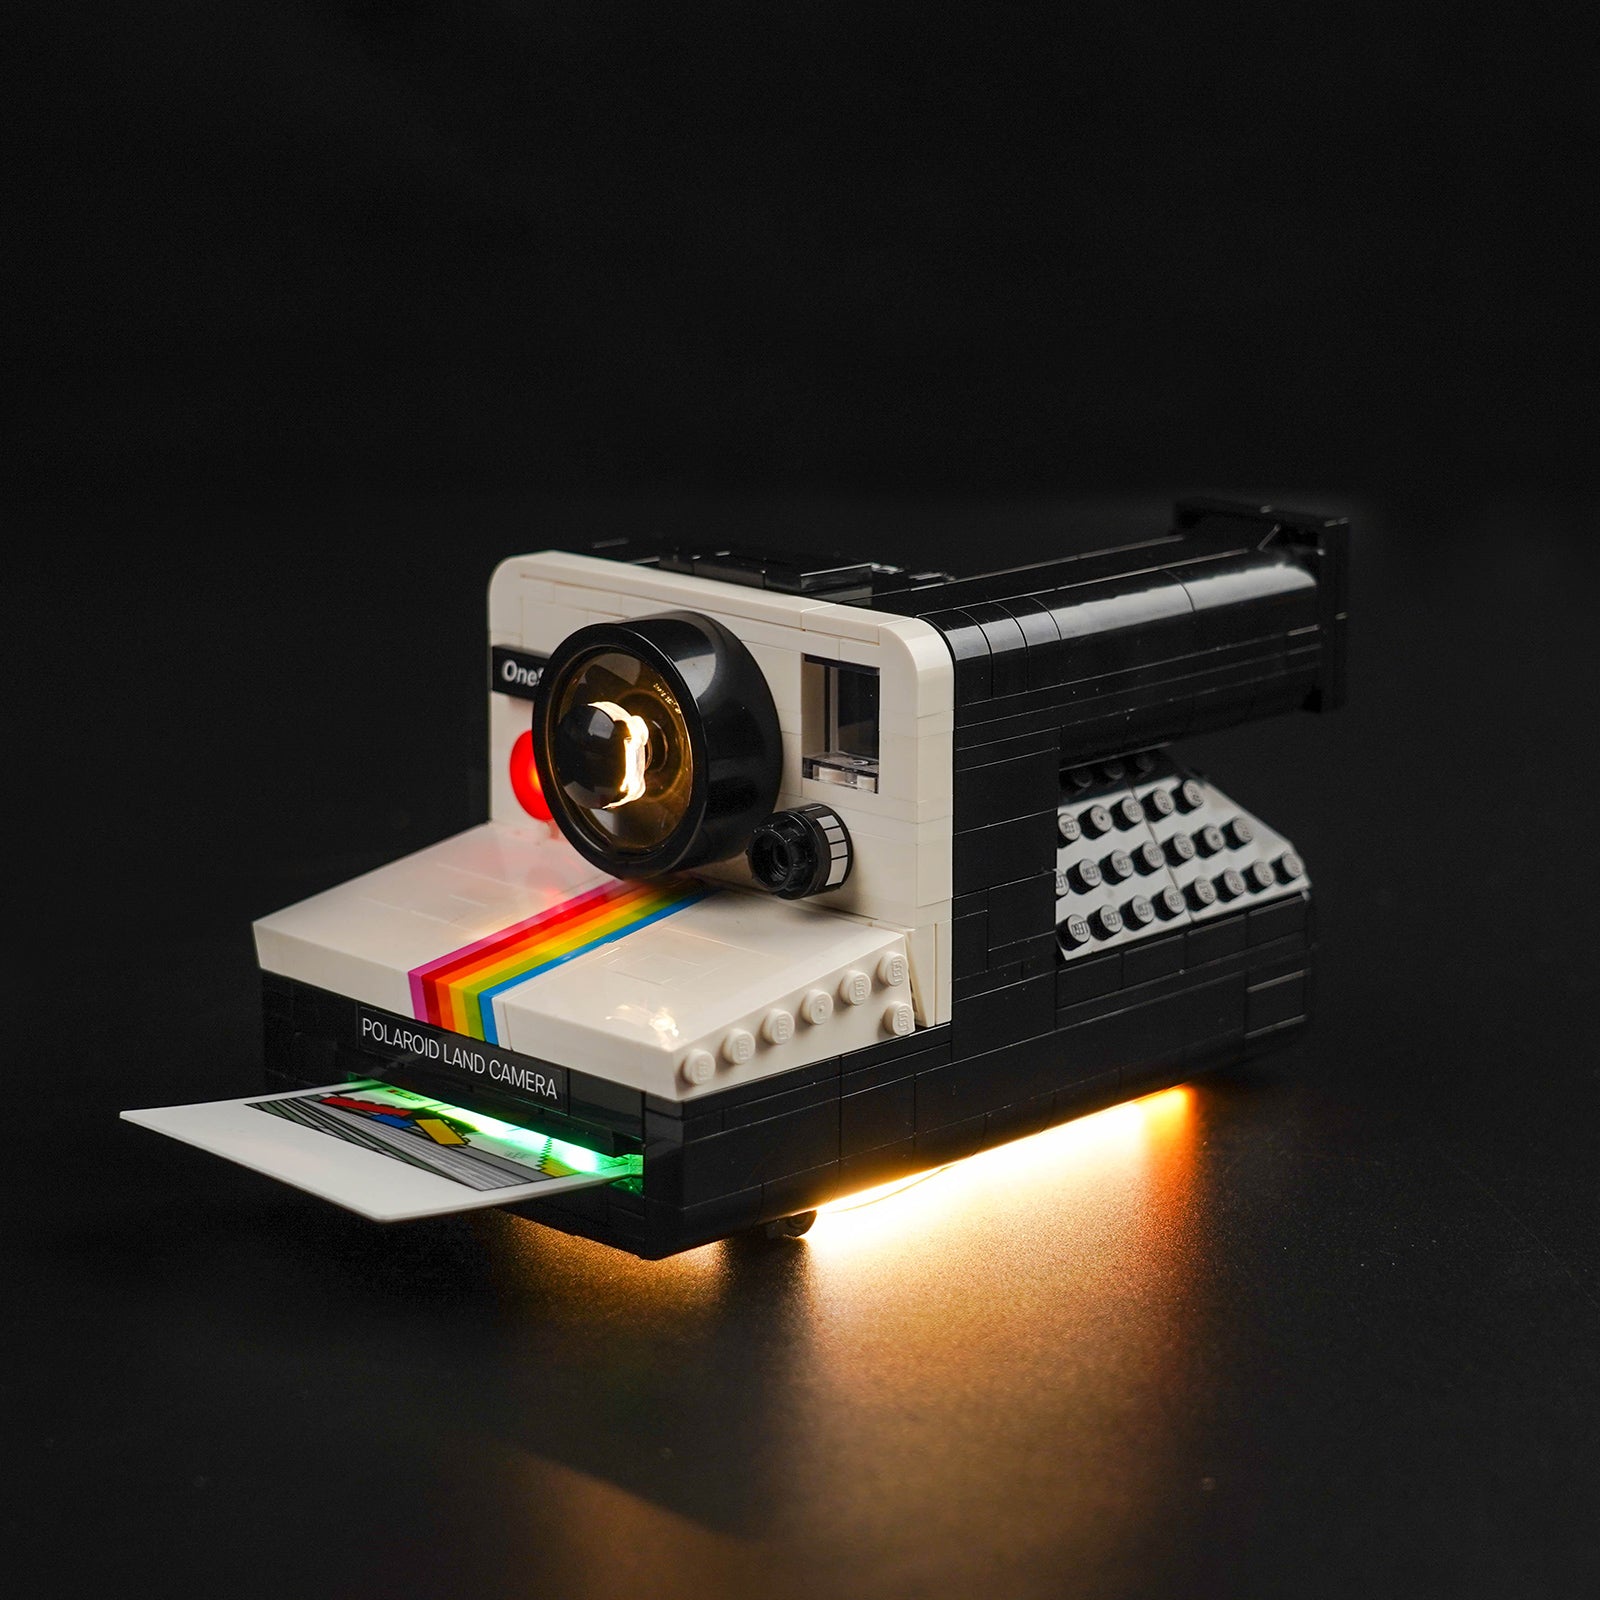 Light up LEGO bricks with the our carefully selected LEDs.